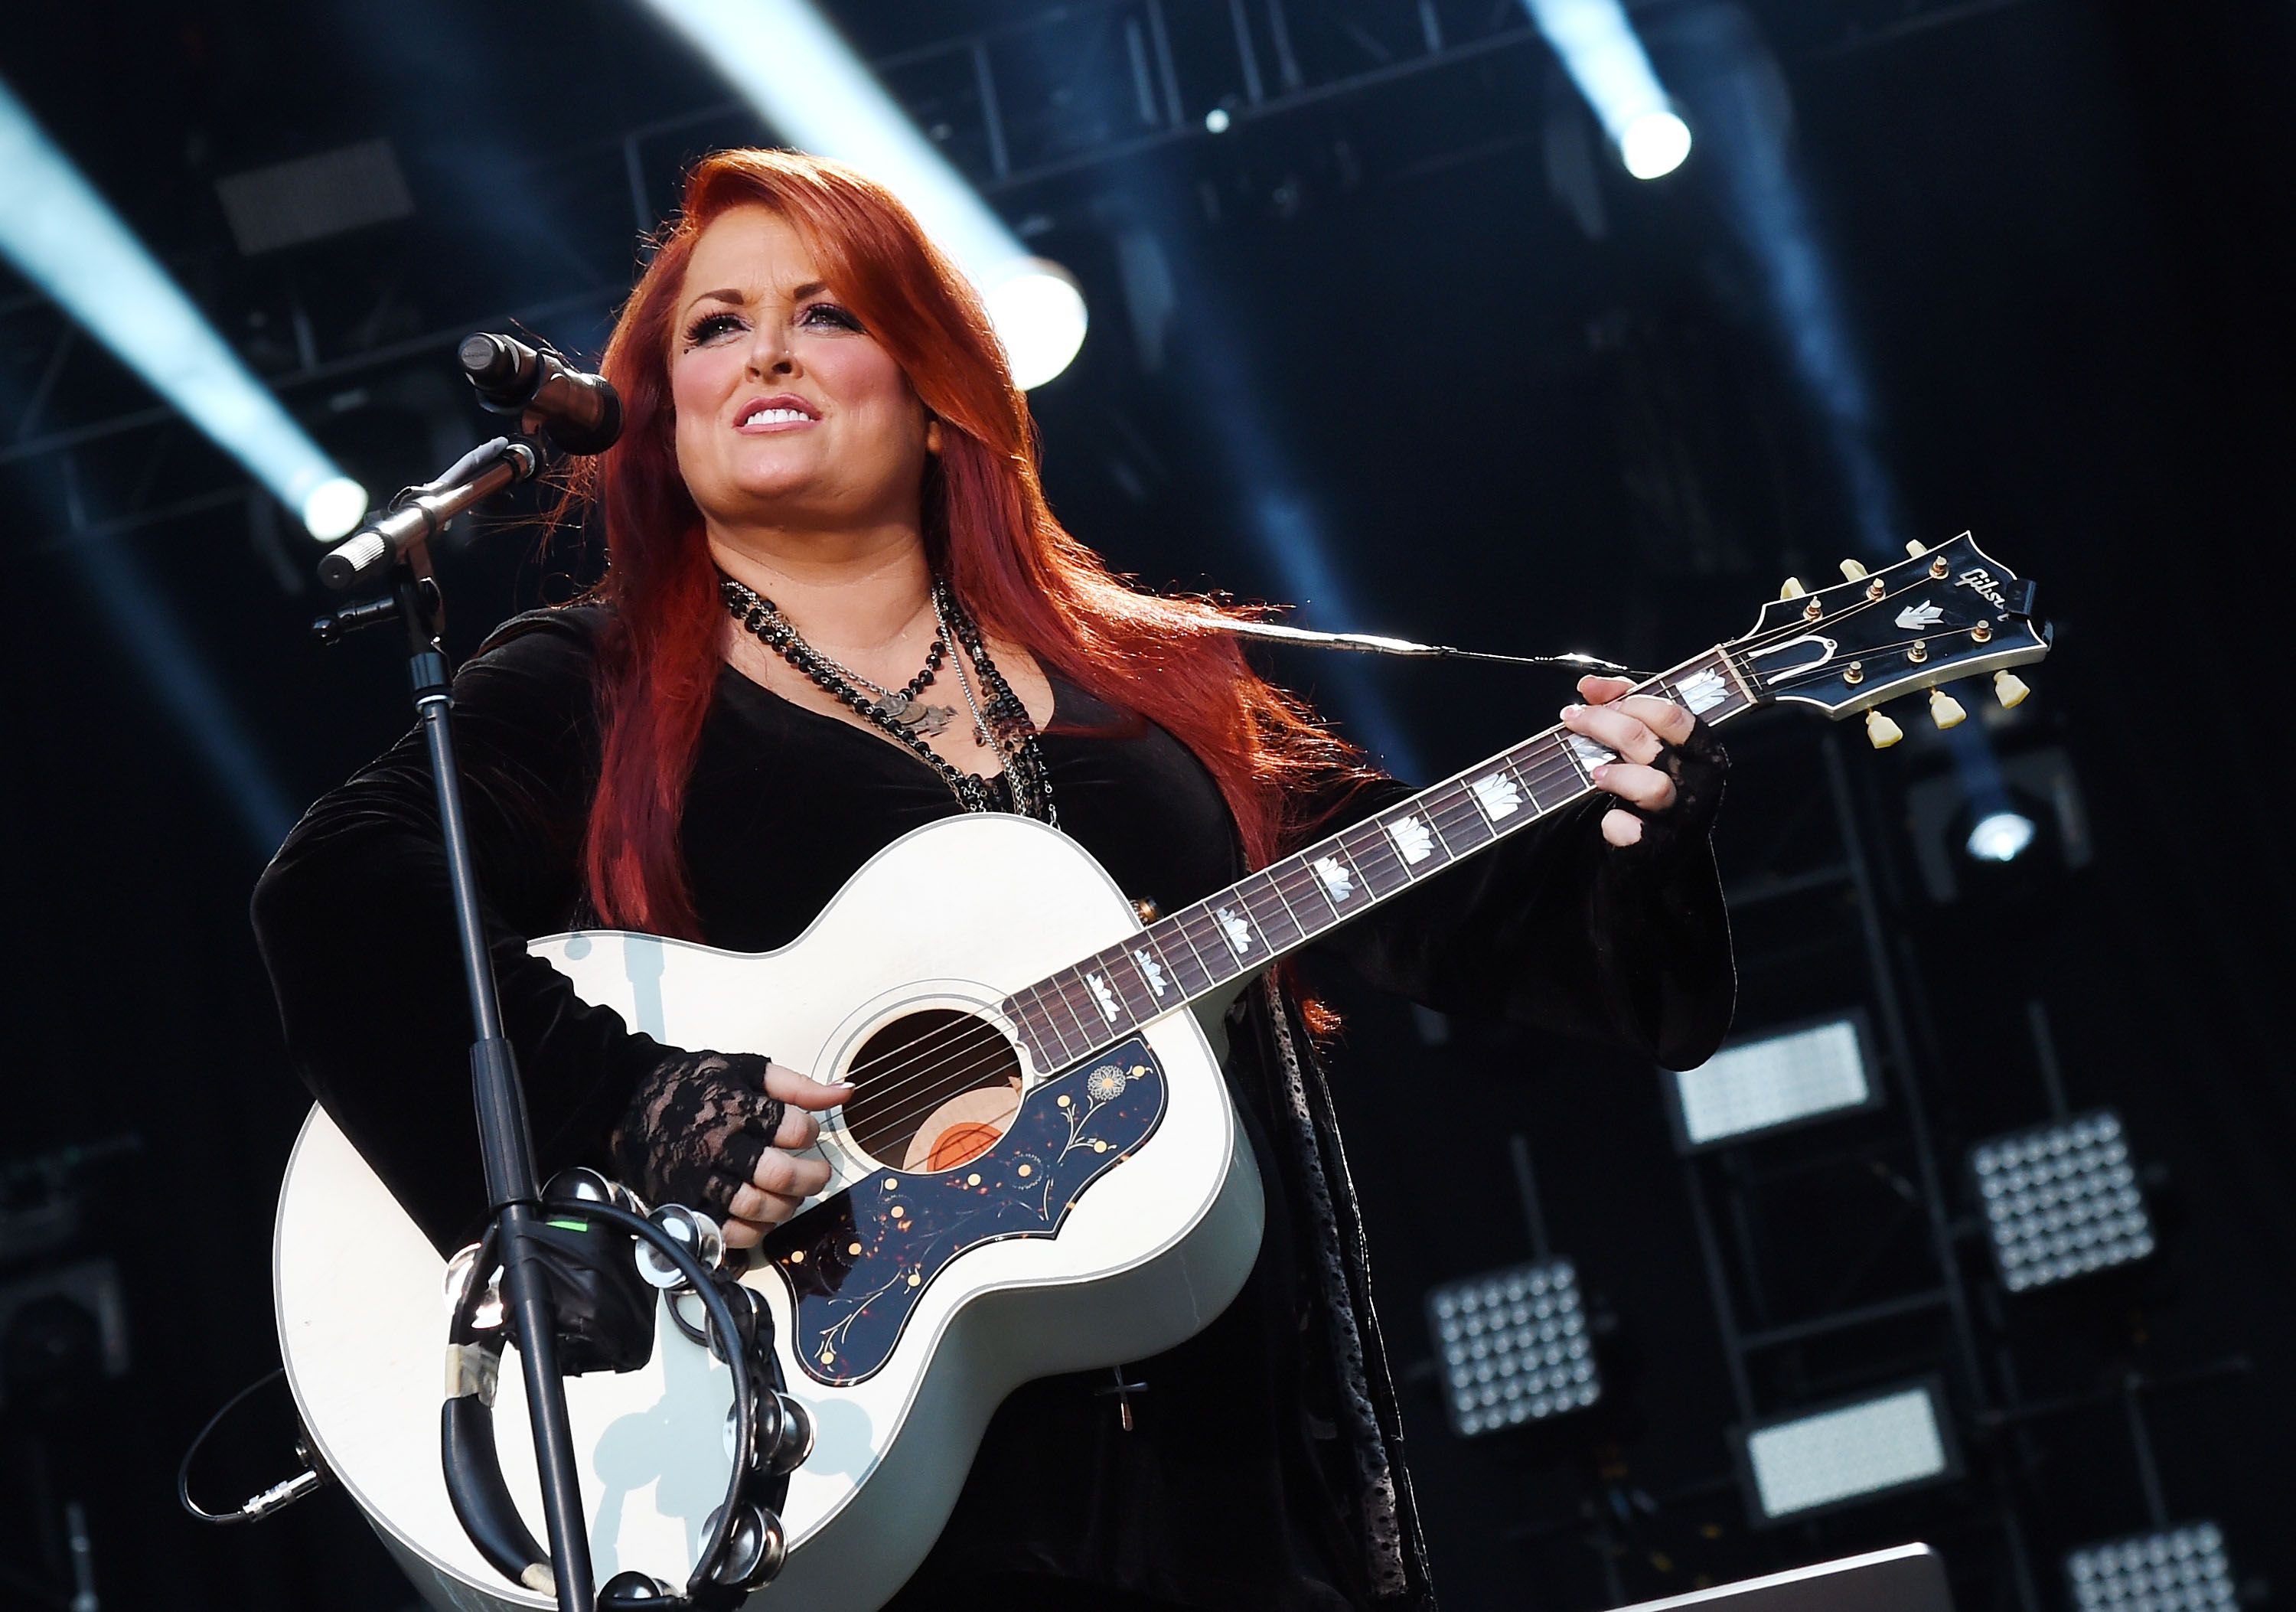 Wynonna Judd of Wynonna & The Big Noise performs onstage during the 2015 CMA Festival on June 13, 2015 in Nashville, Tennessee. | Source: Getty Images